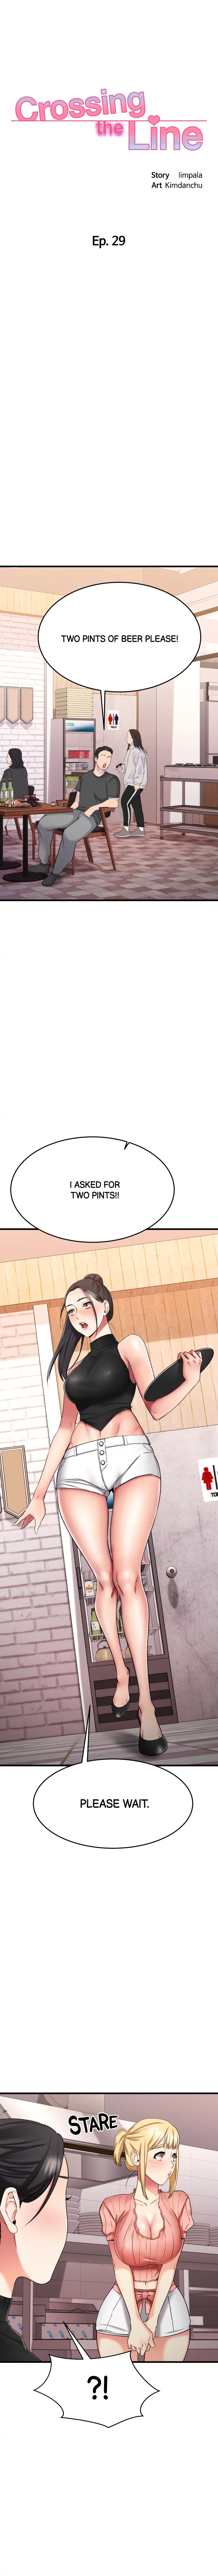 My Female Friend Who Crossed The Line - Chapter 29 Page 11